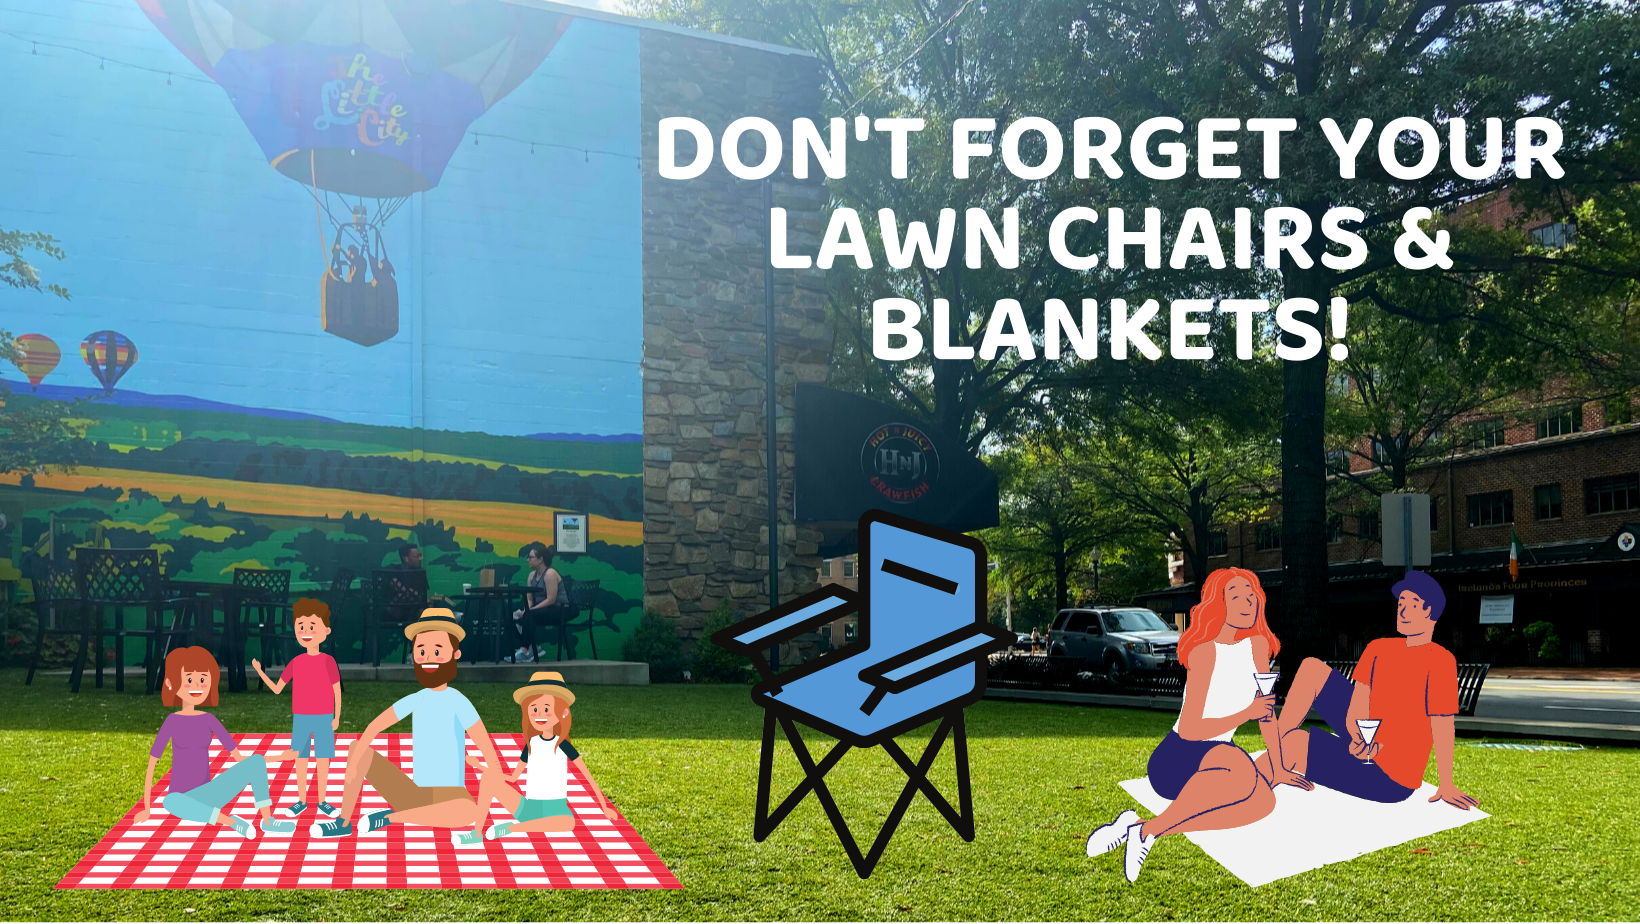 BRING YOUR OWN LAWN CHAIR!